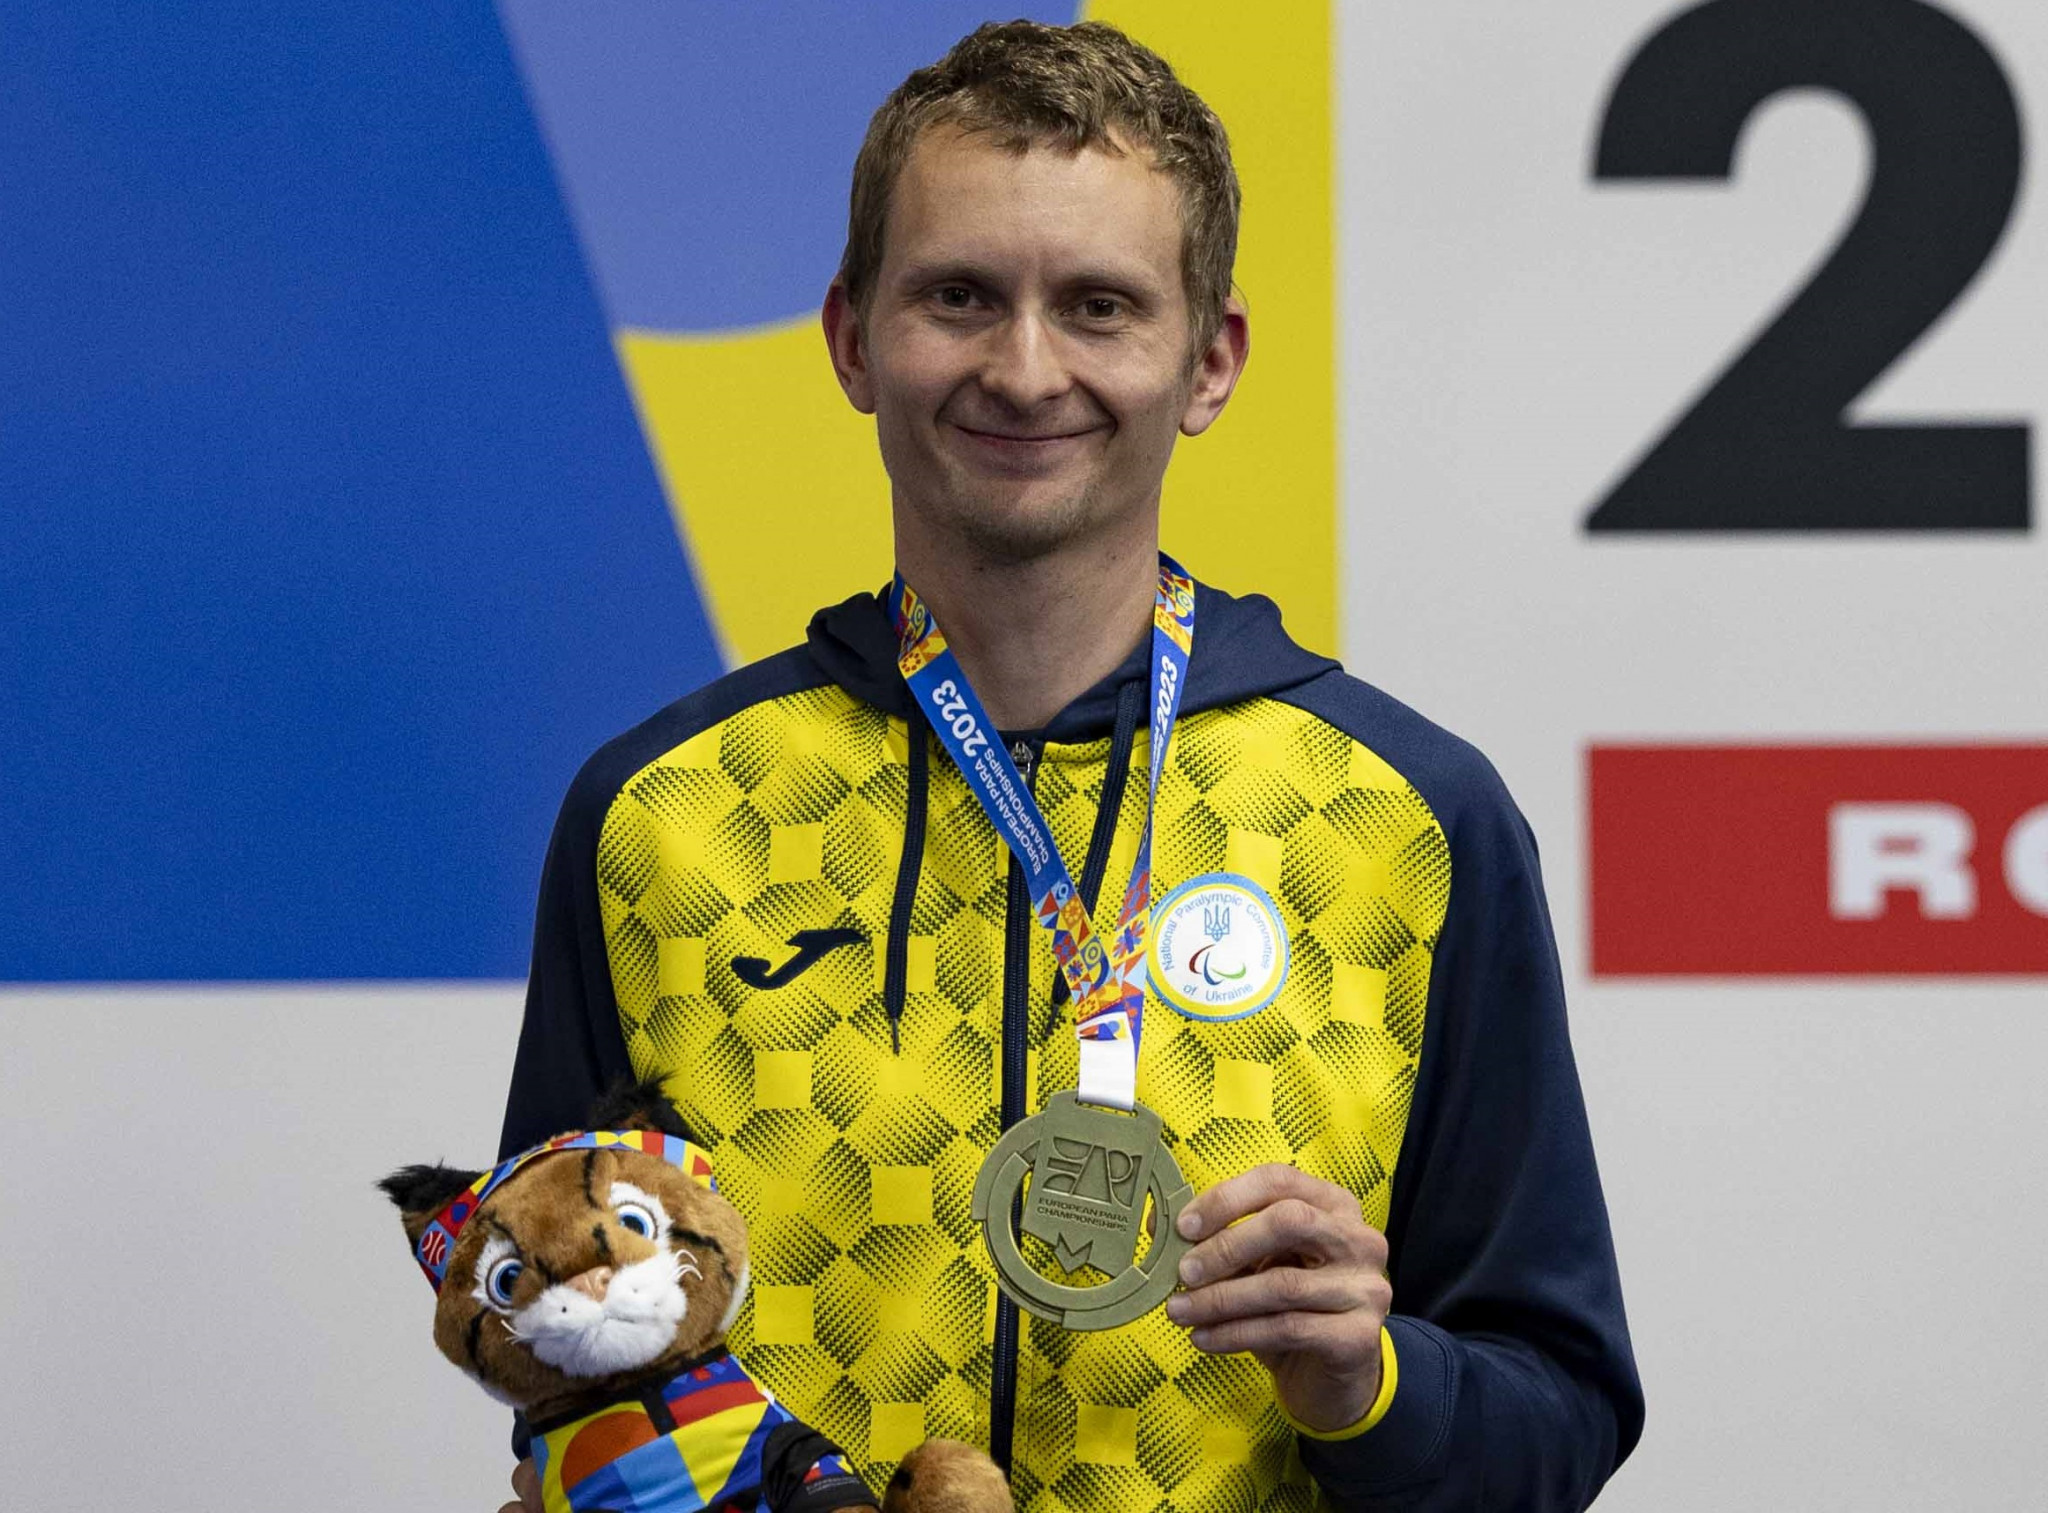 Andrii Doroshenko of Ukraine triumphed in the R1 men’s 10m air rifle standing SH1 category ©EPC